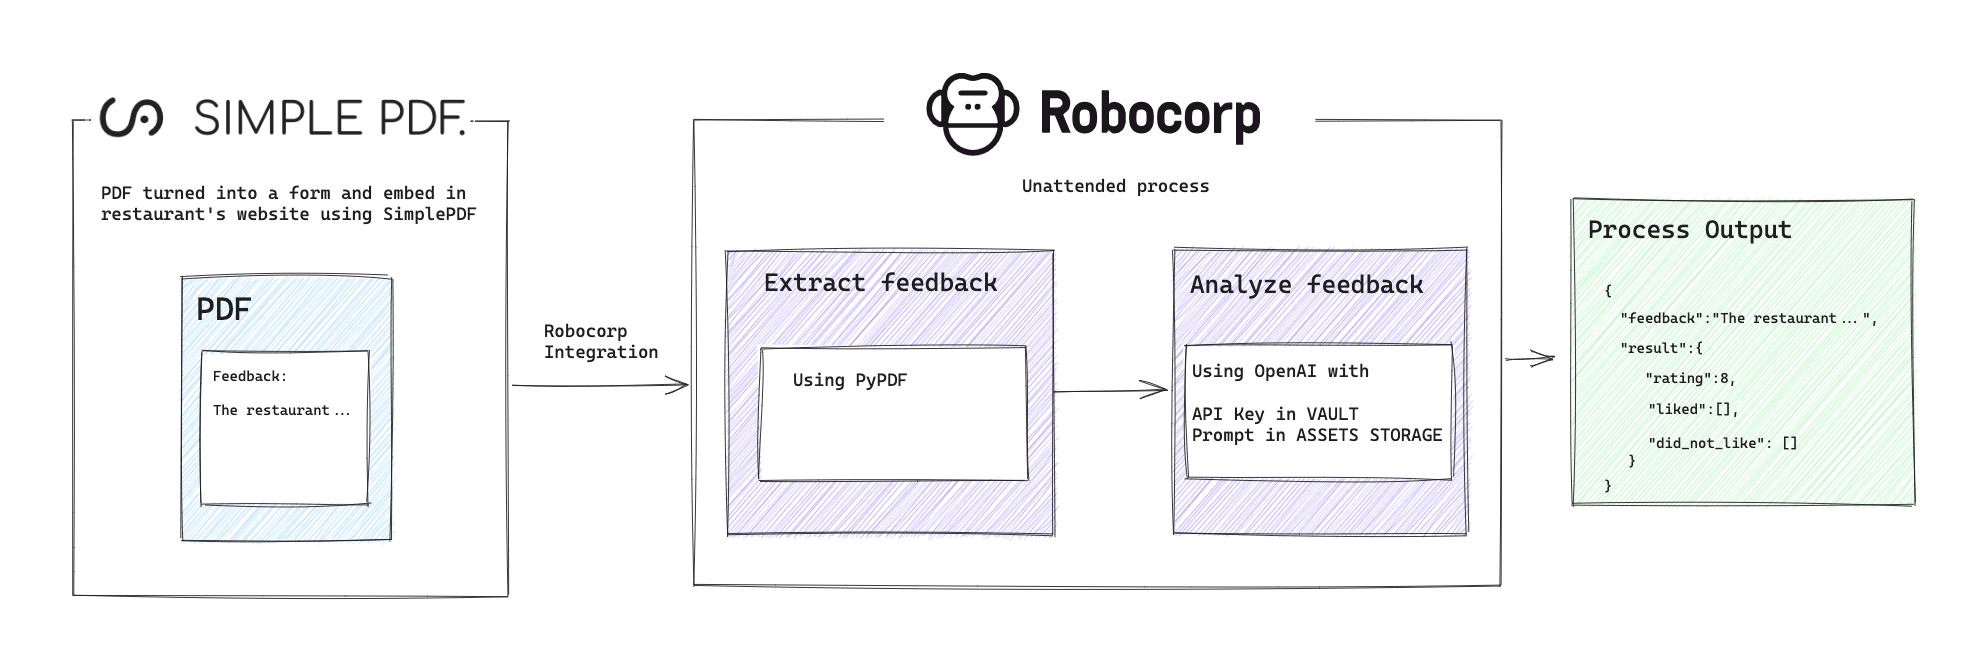 Overview of the SimplePDF Robocorp integration IDP workflow